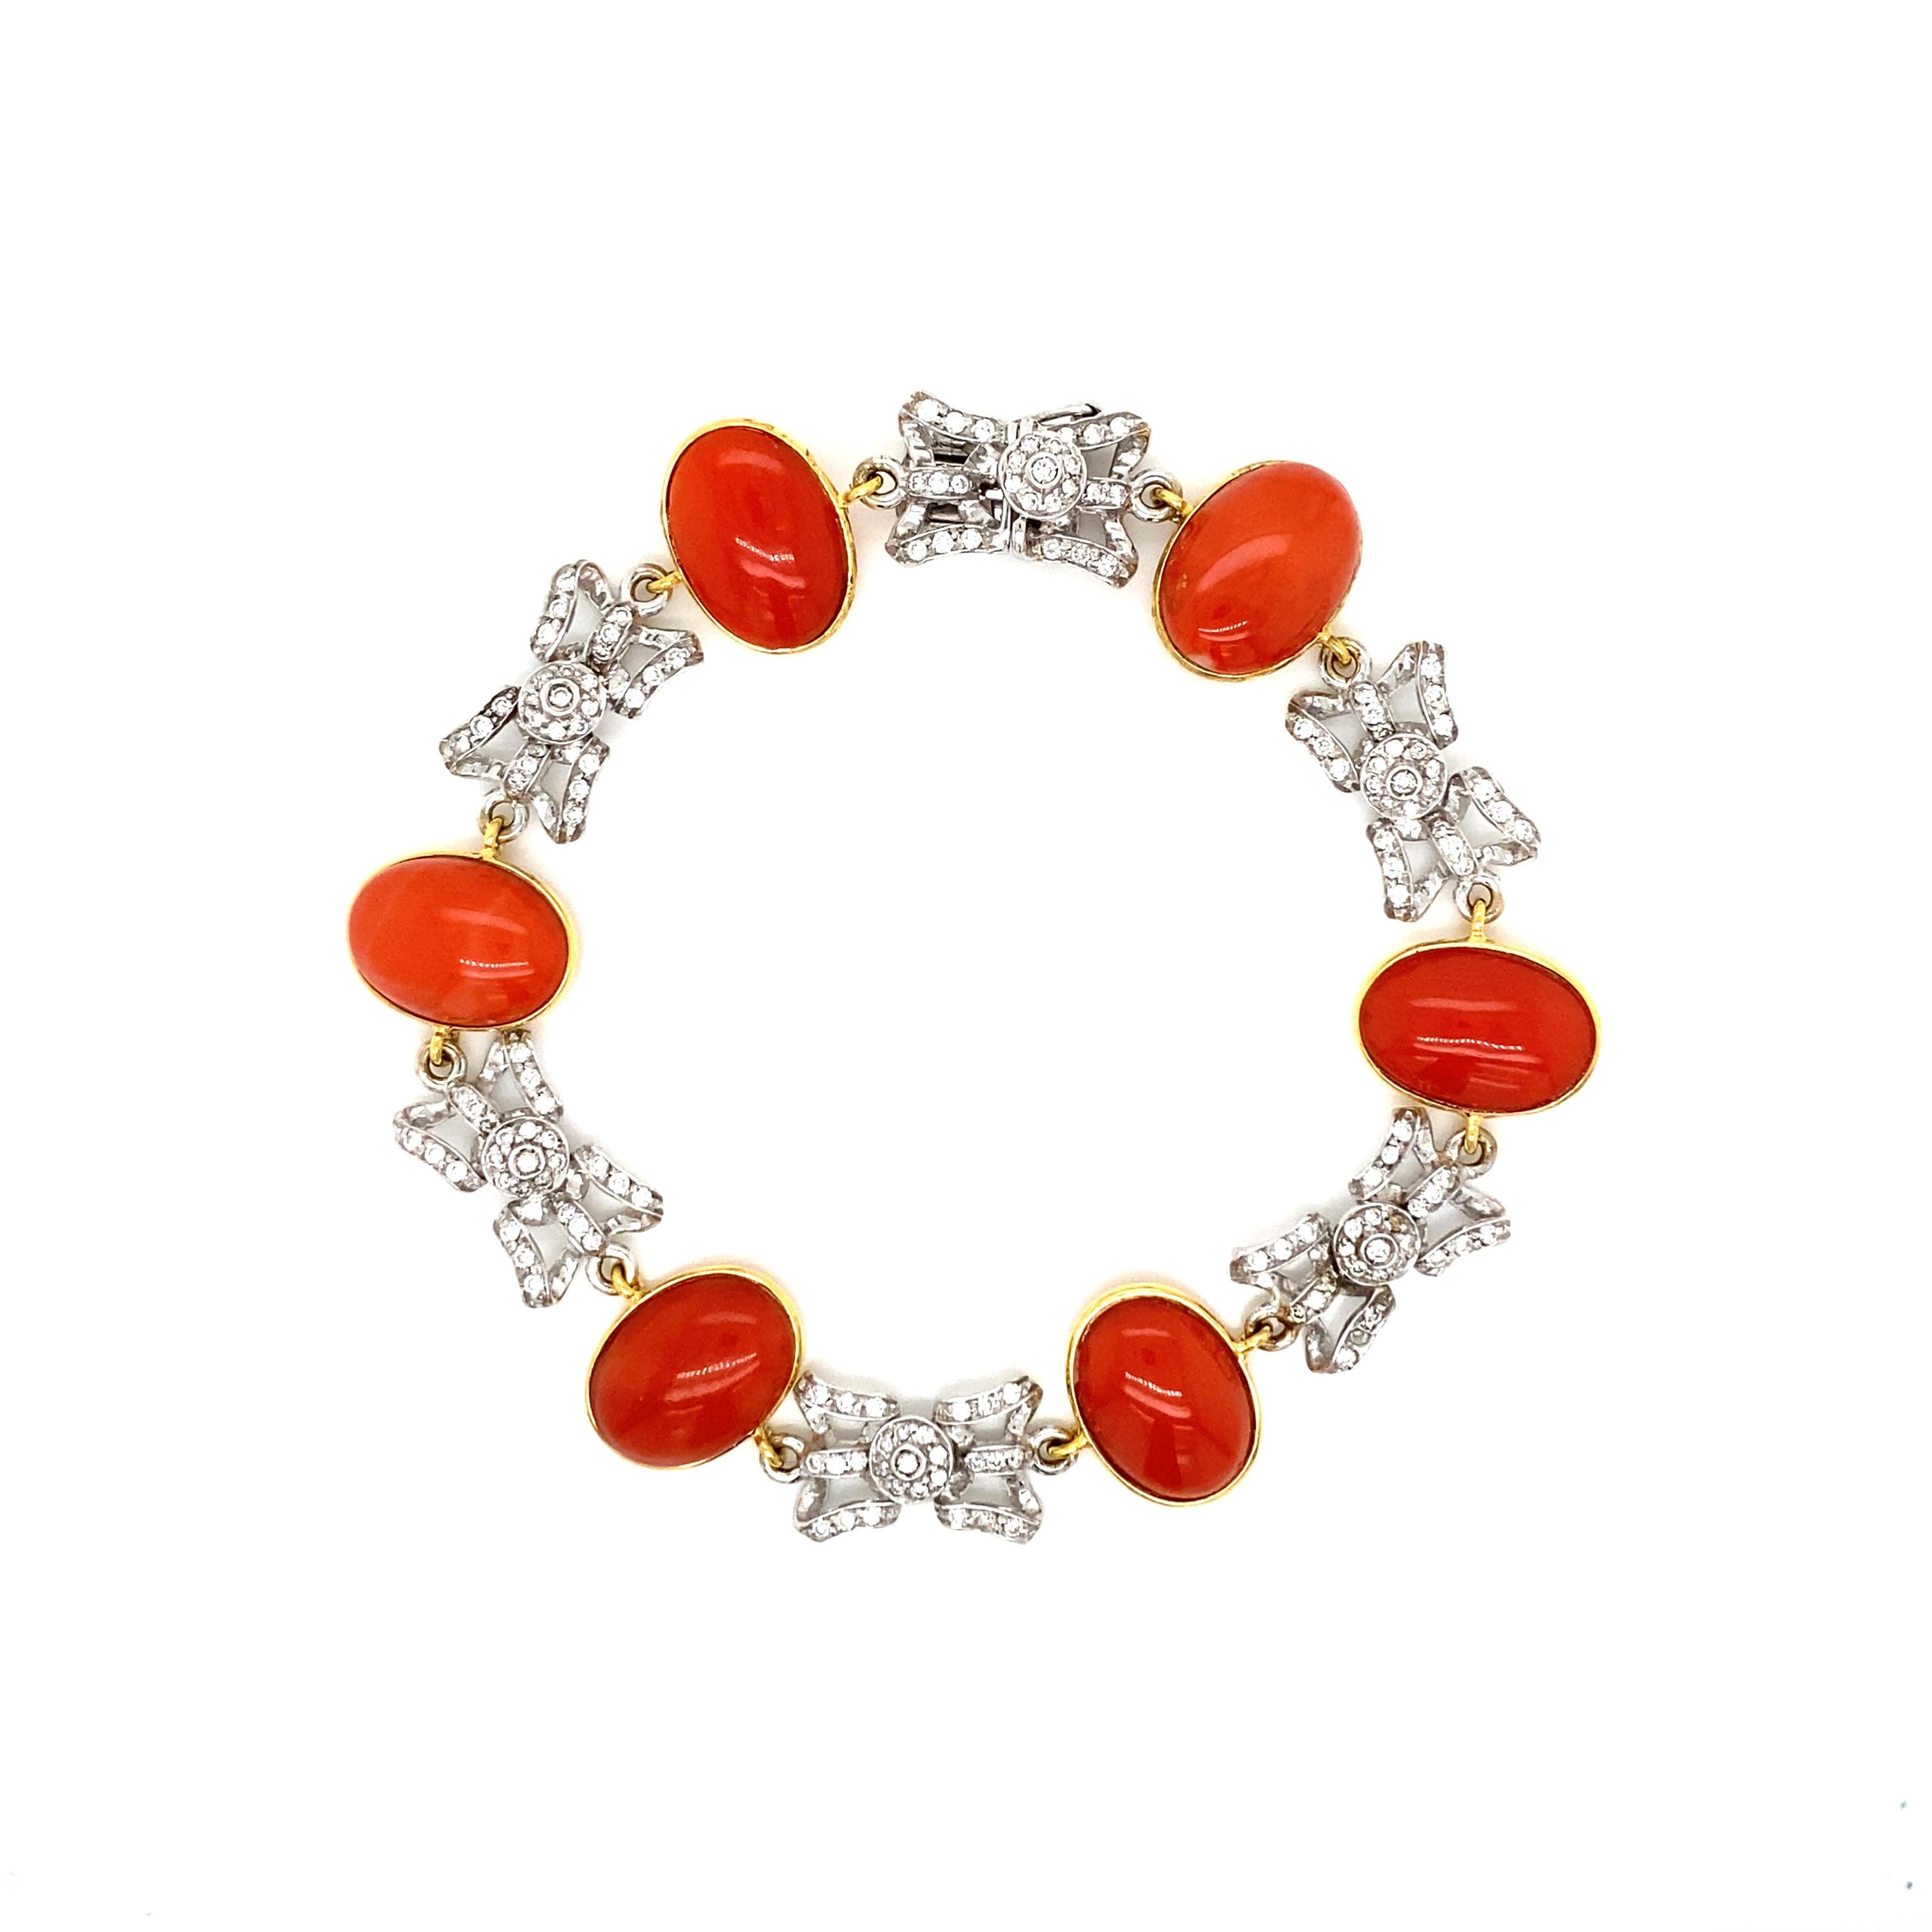 A fine and elegant 18k yellow and white Gold bracelet handcrafted in Italy by the Florentine designer 